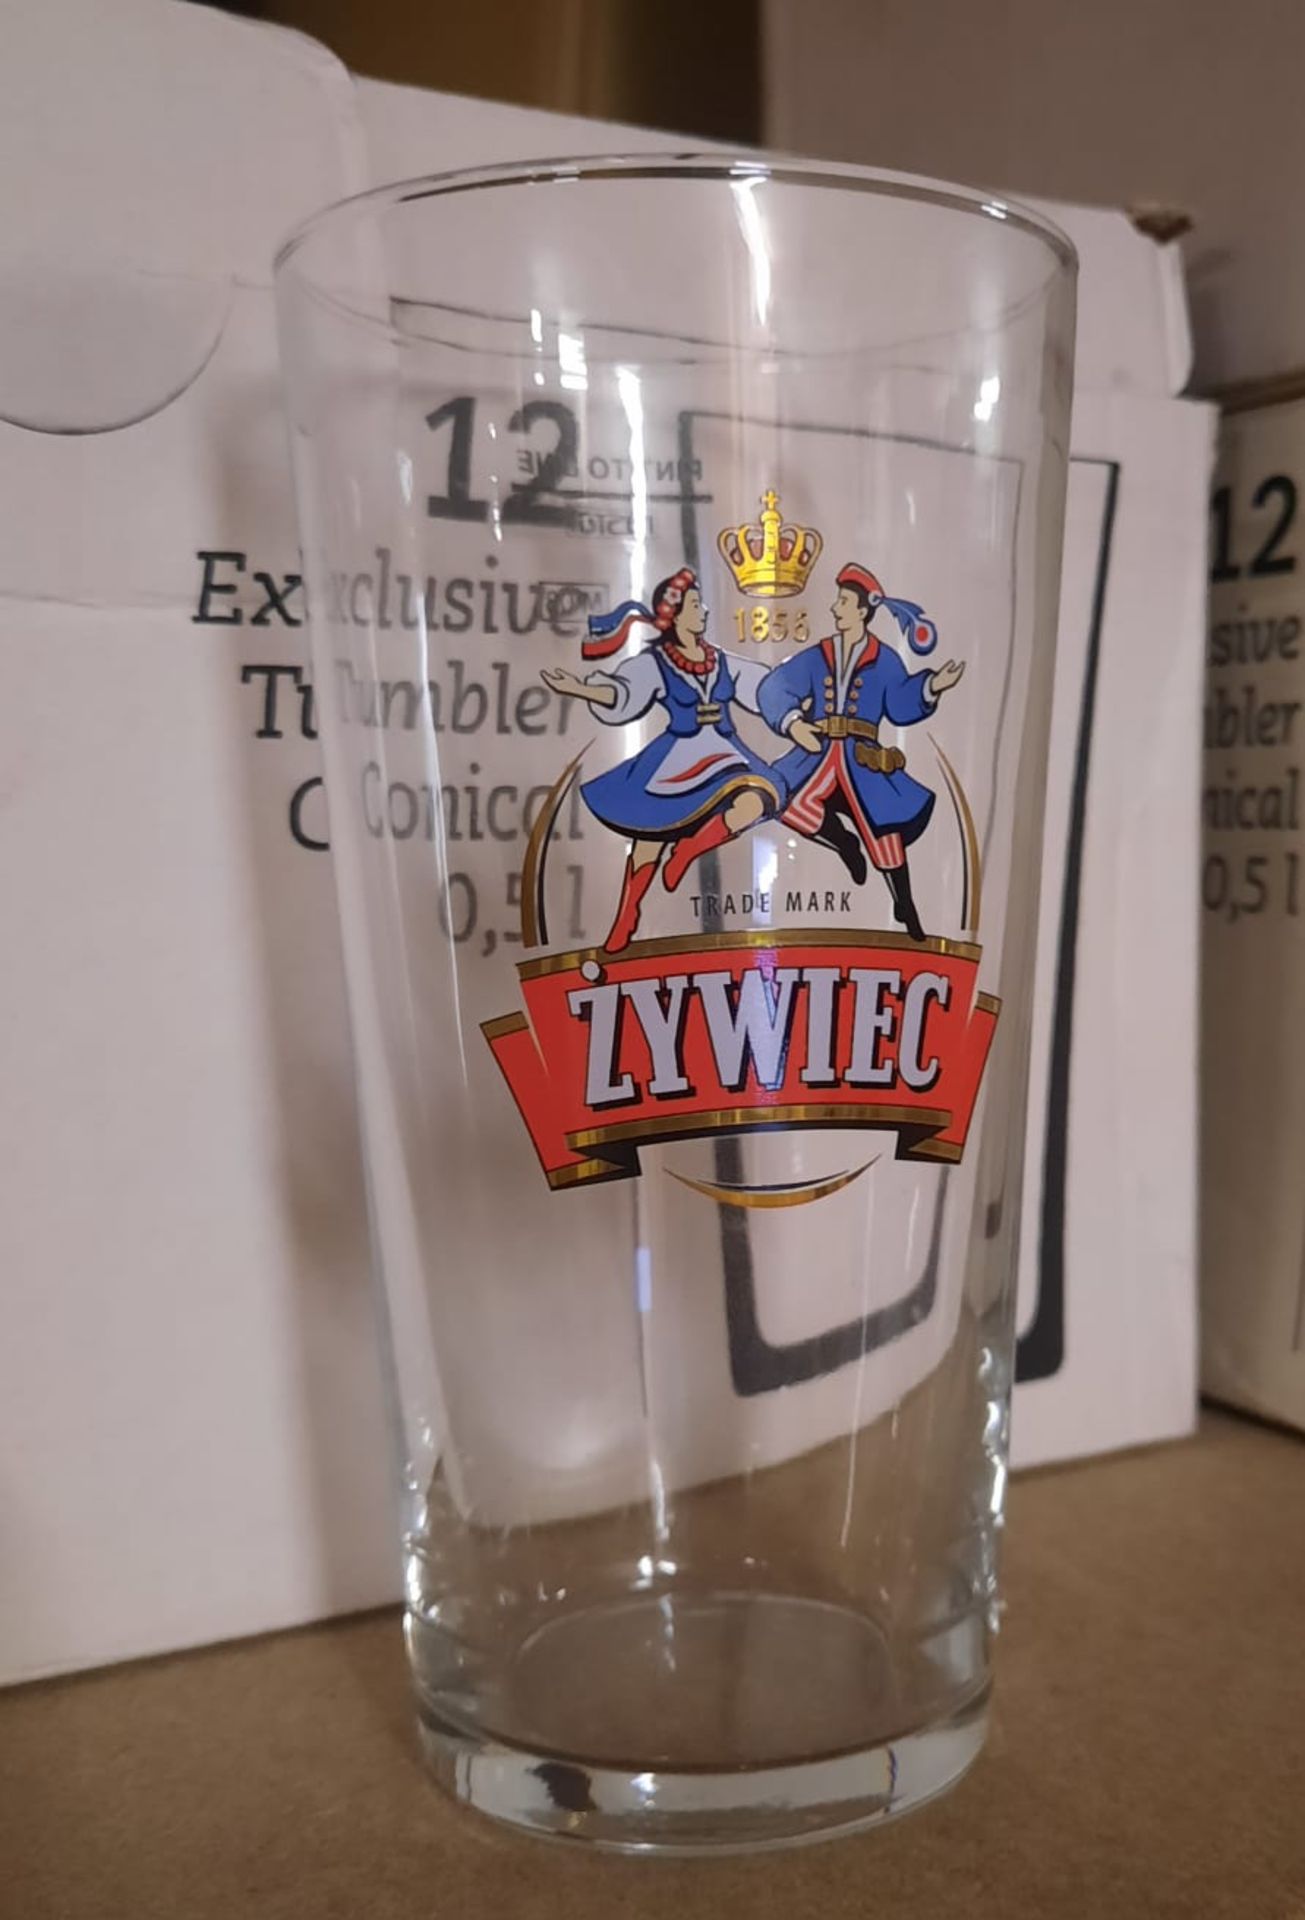 X 36 BRAND NEW & BOXED ZYWIEC PINTS GLASSES GREAT QUALITY - SALEROOM ON TO OF ROW (D3).